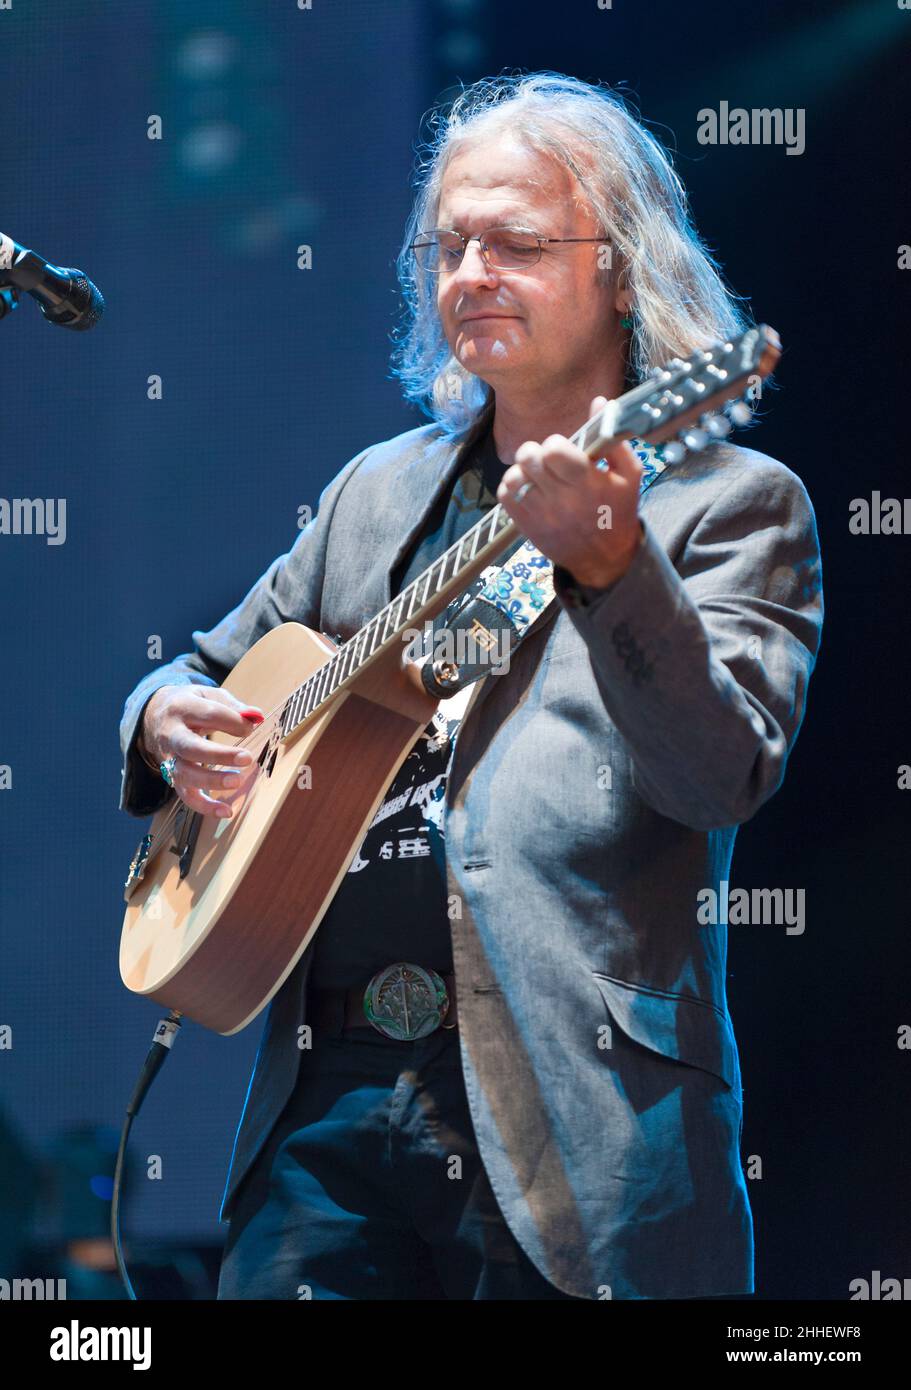 Chris Leslie of Fairport Convention performing at the band's Cropredy Convention, UK in 2012 Stock Photo